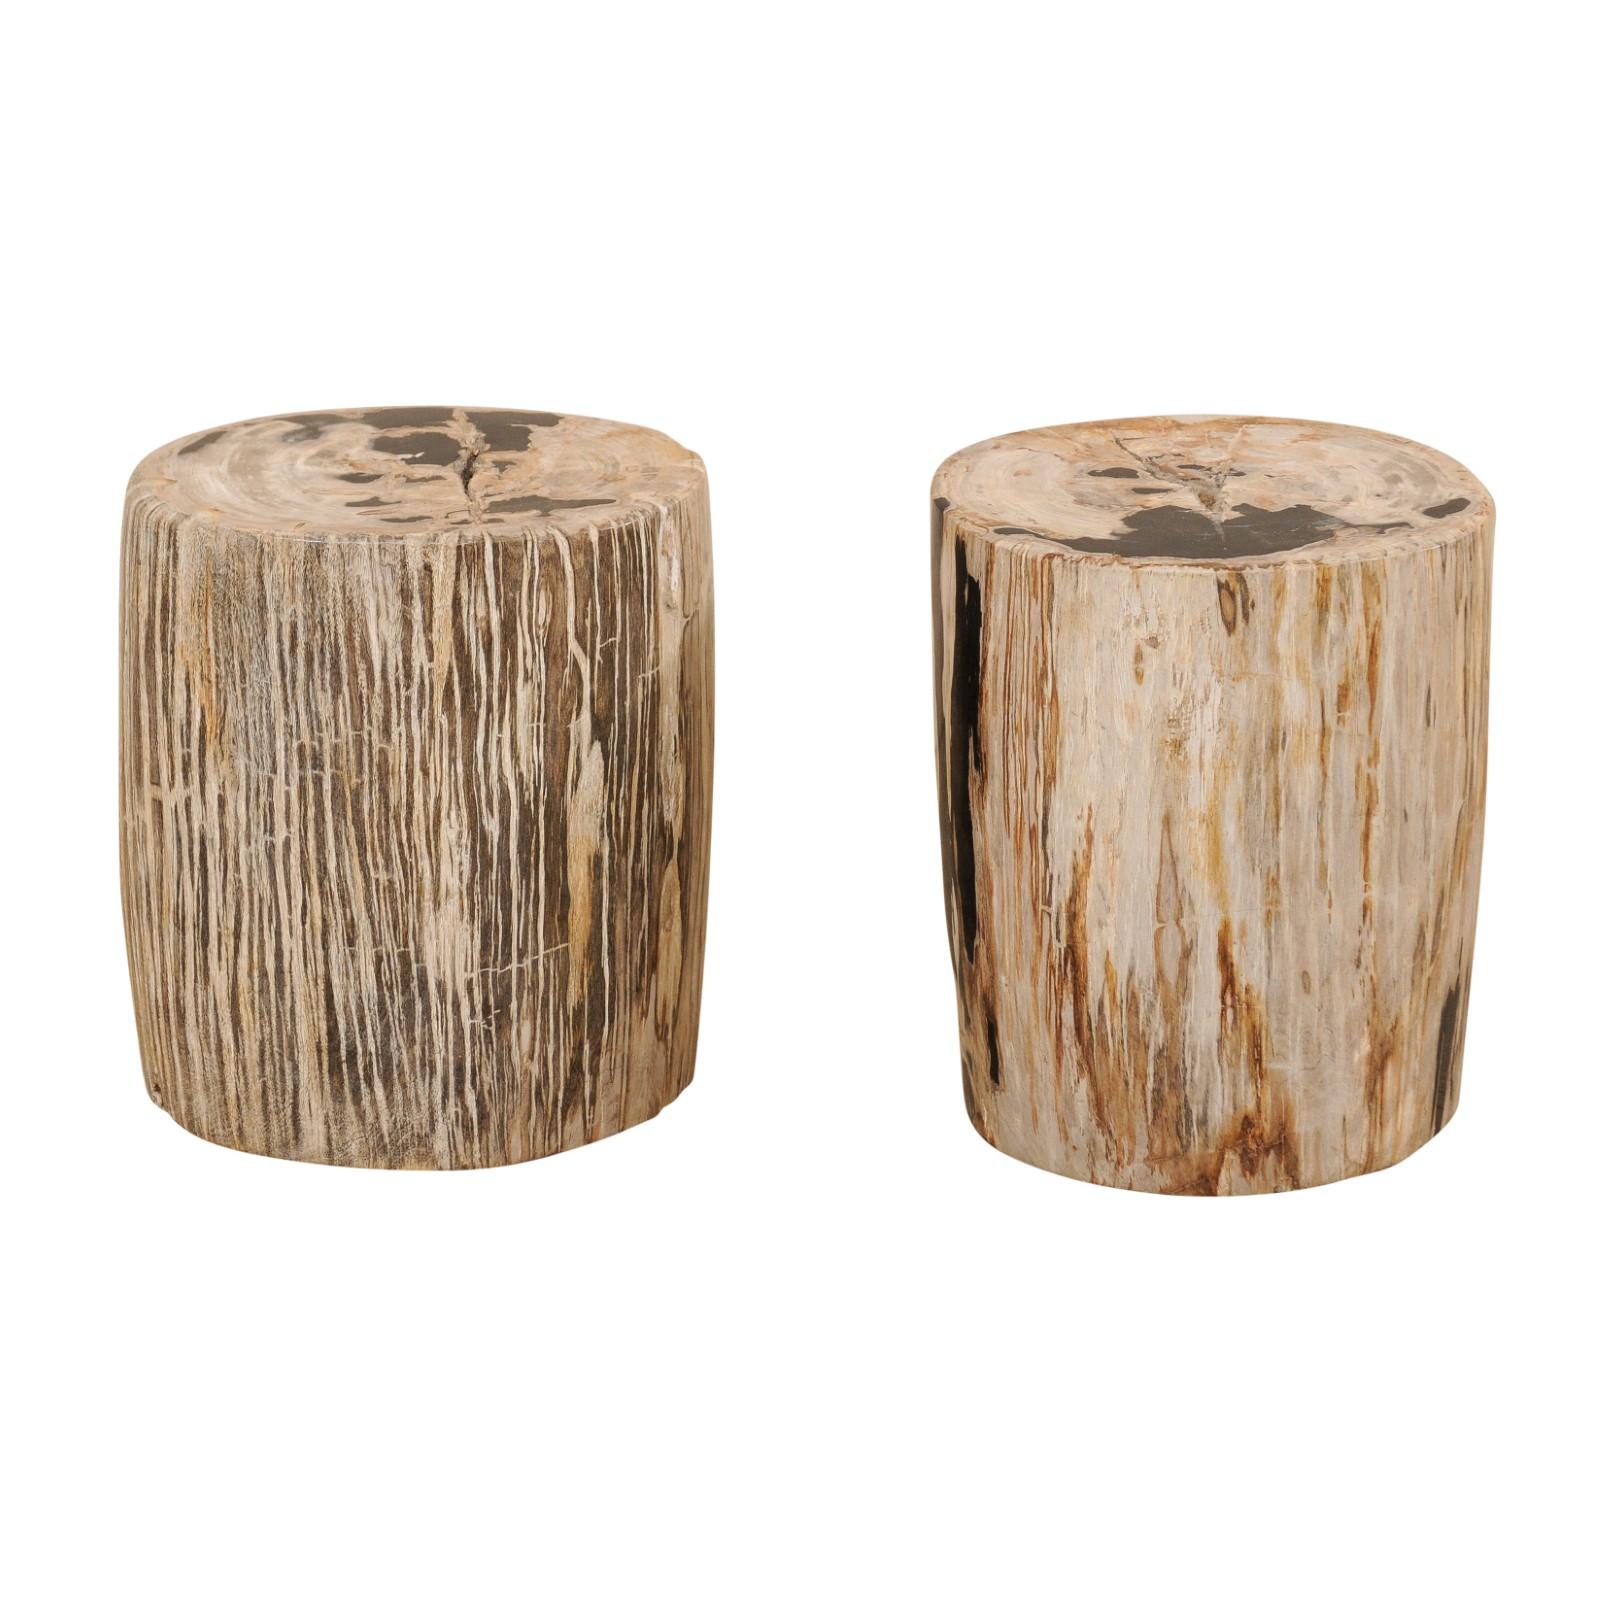 Pair of Petrified Wood Side Tables or Stools in Beautiful Cream and Black Colors